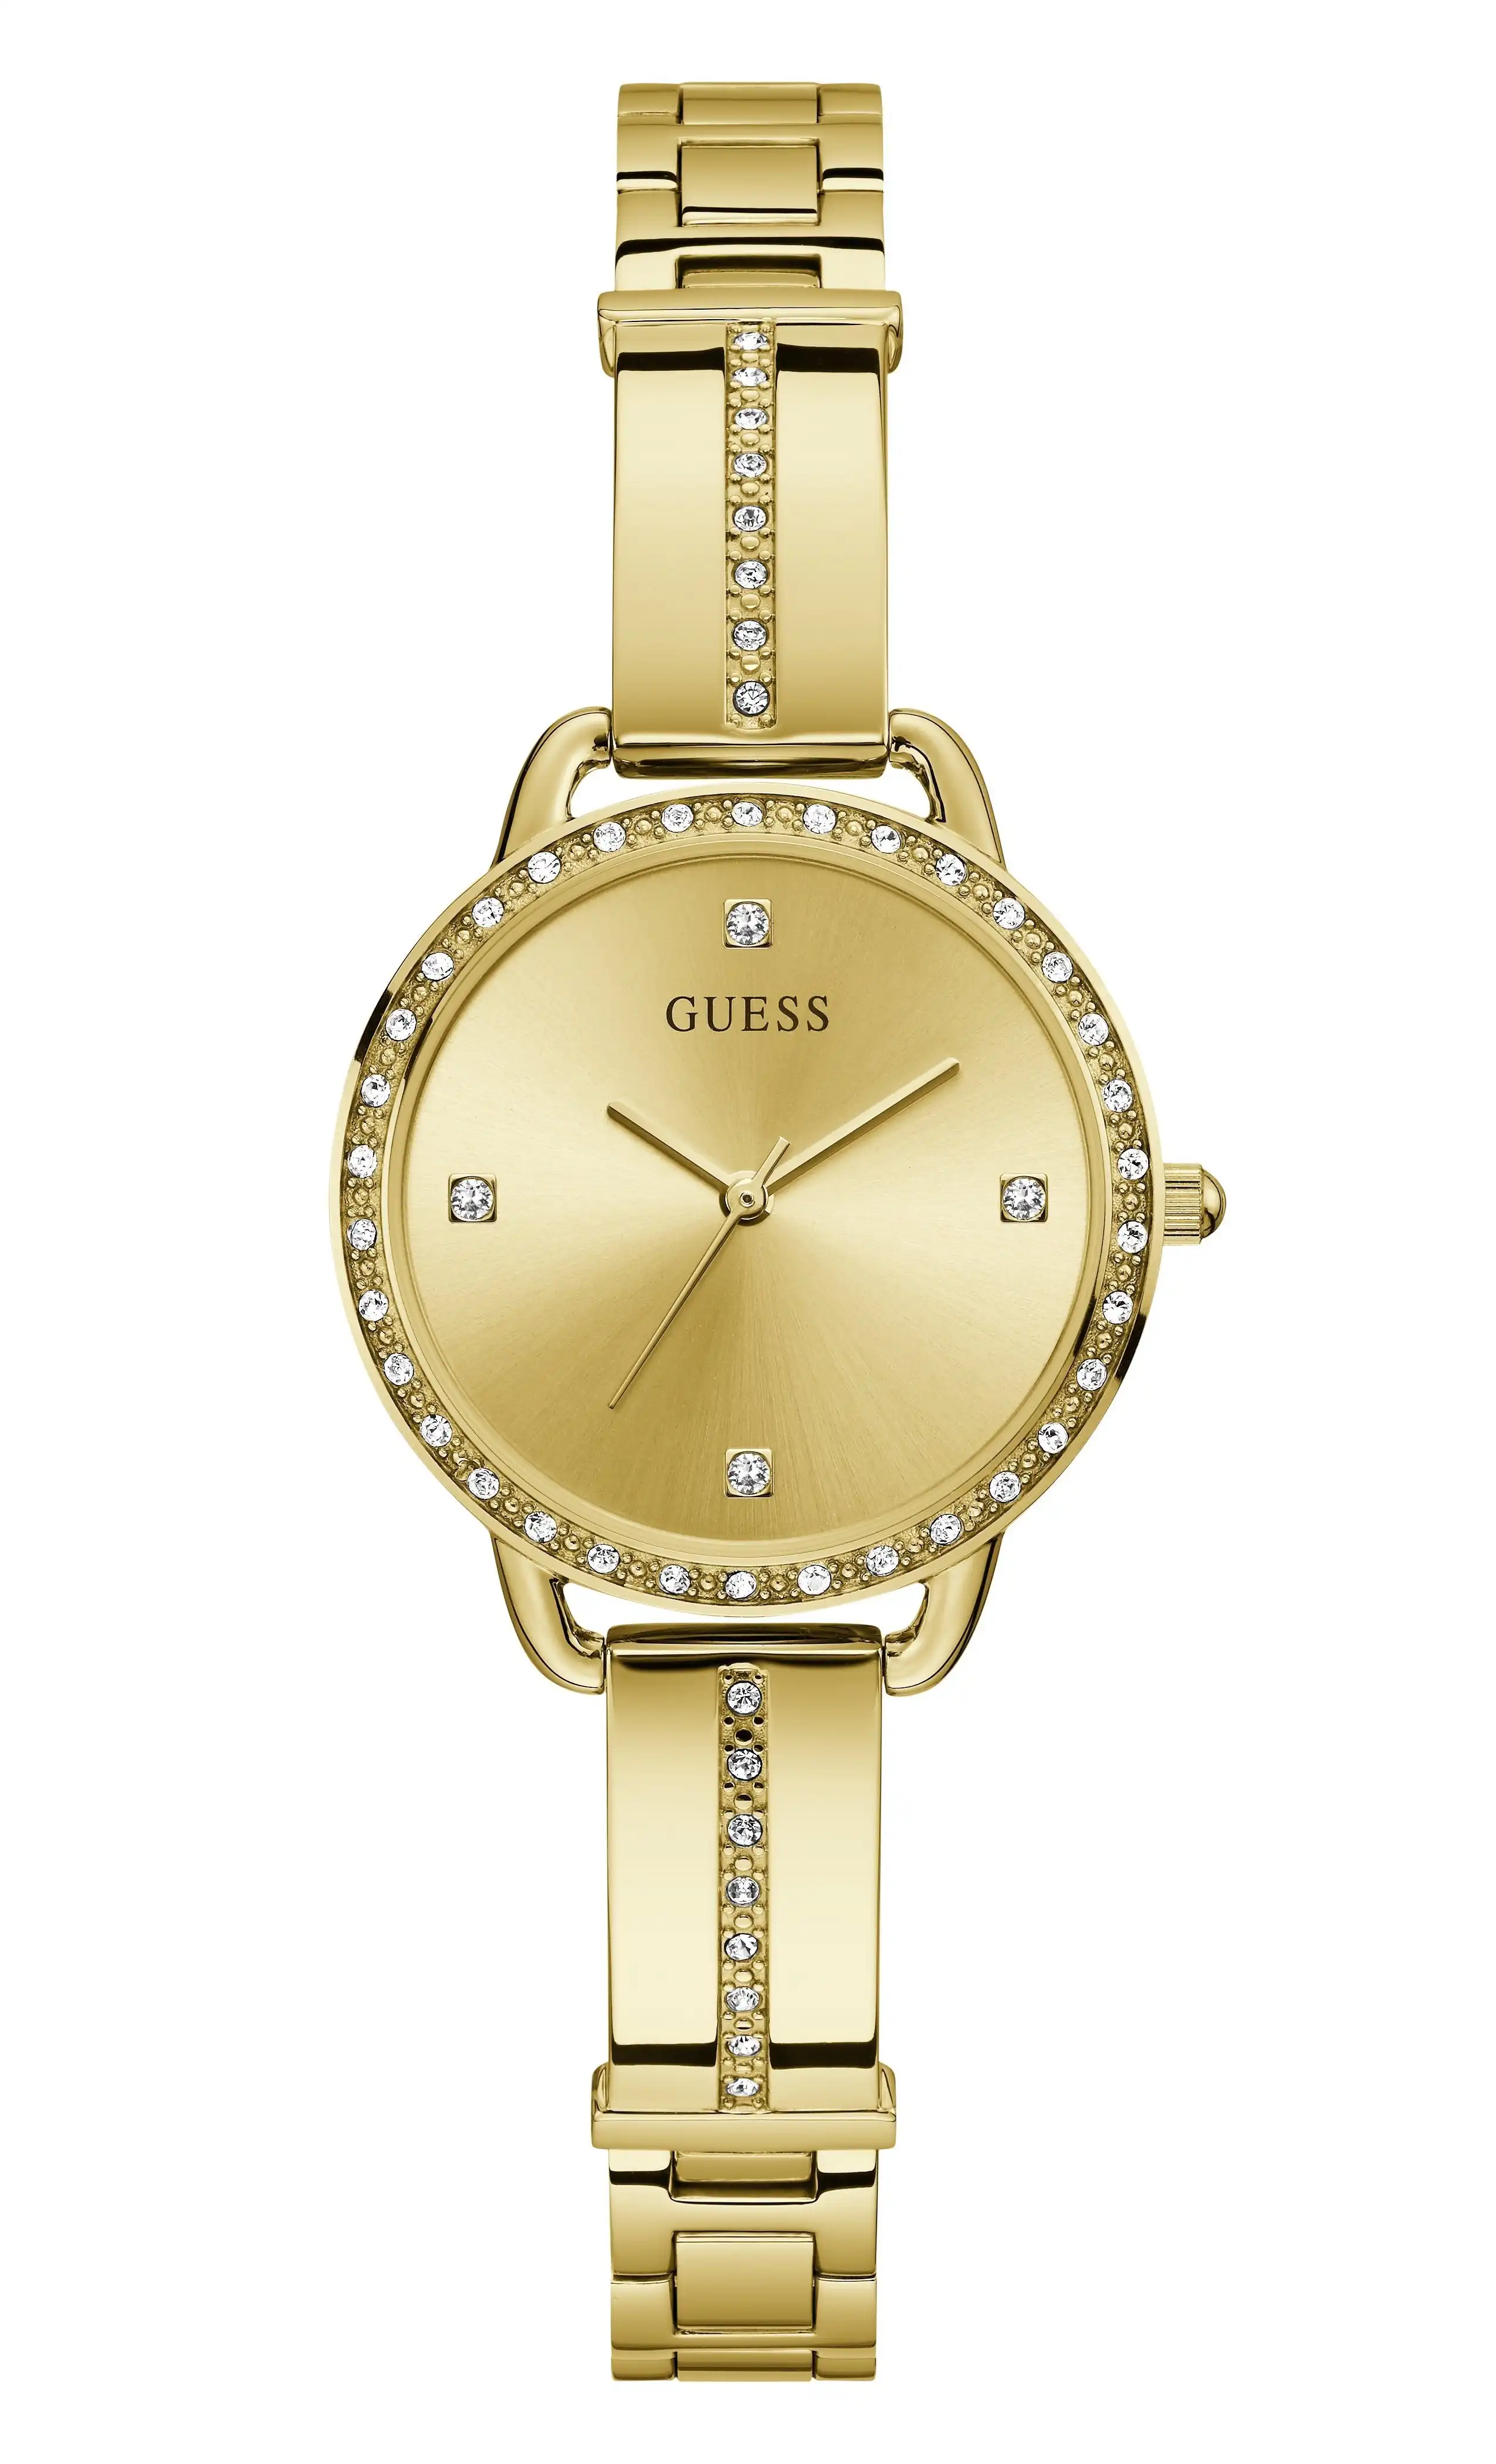 Guess Bellini Gold Tone Stainless Steel Watch GW0022L2